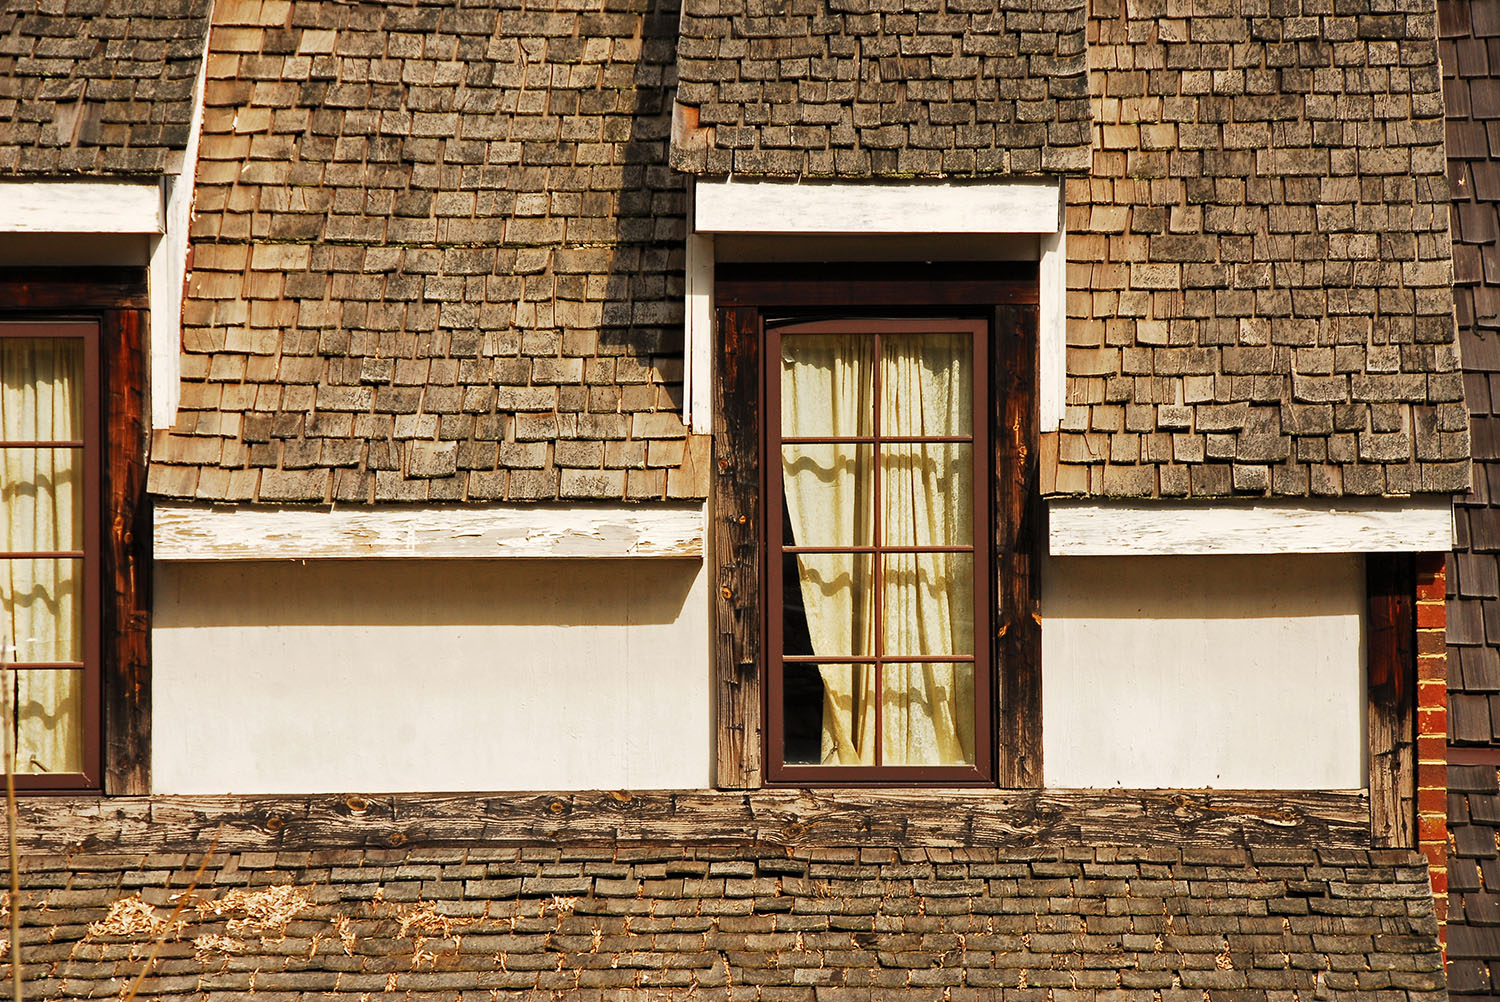 Window_Curtains_Wooden_Shingle_Roof_Rustic_Architecture_Virginia.jpg